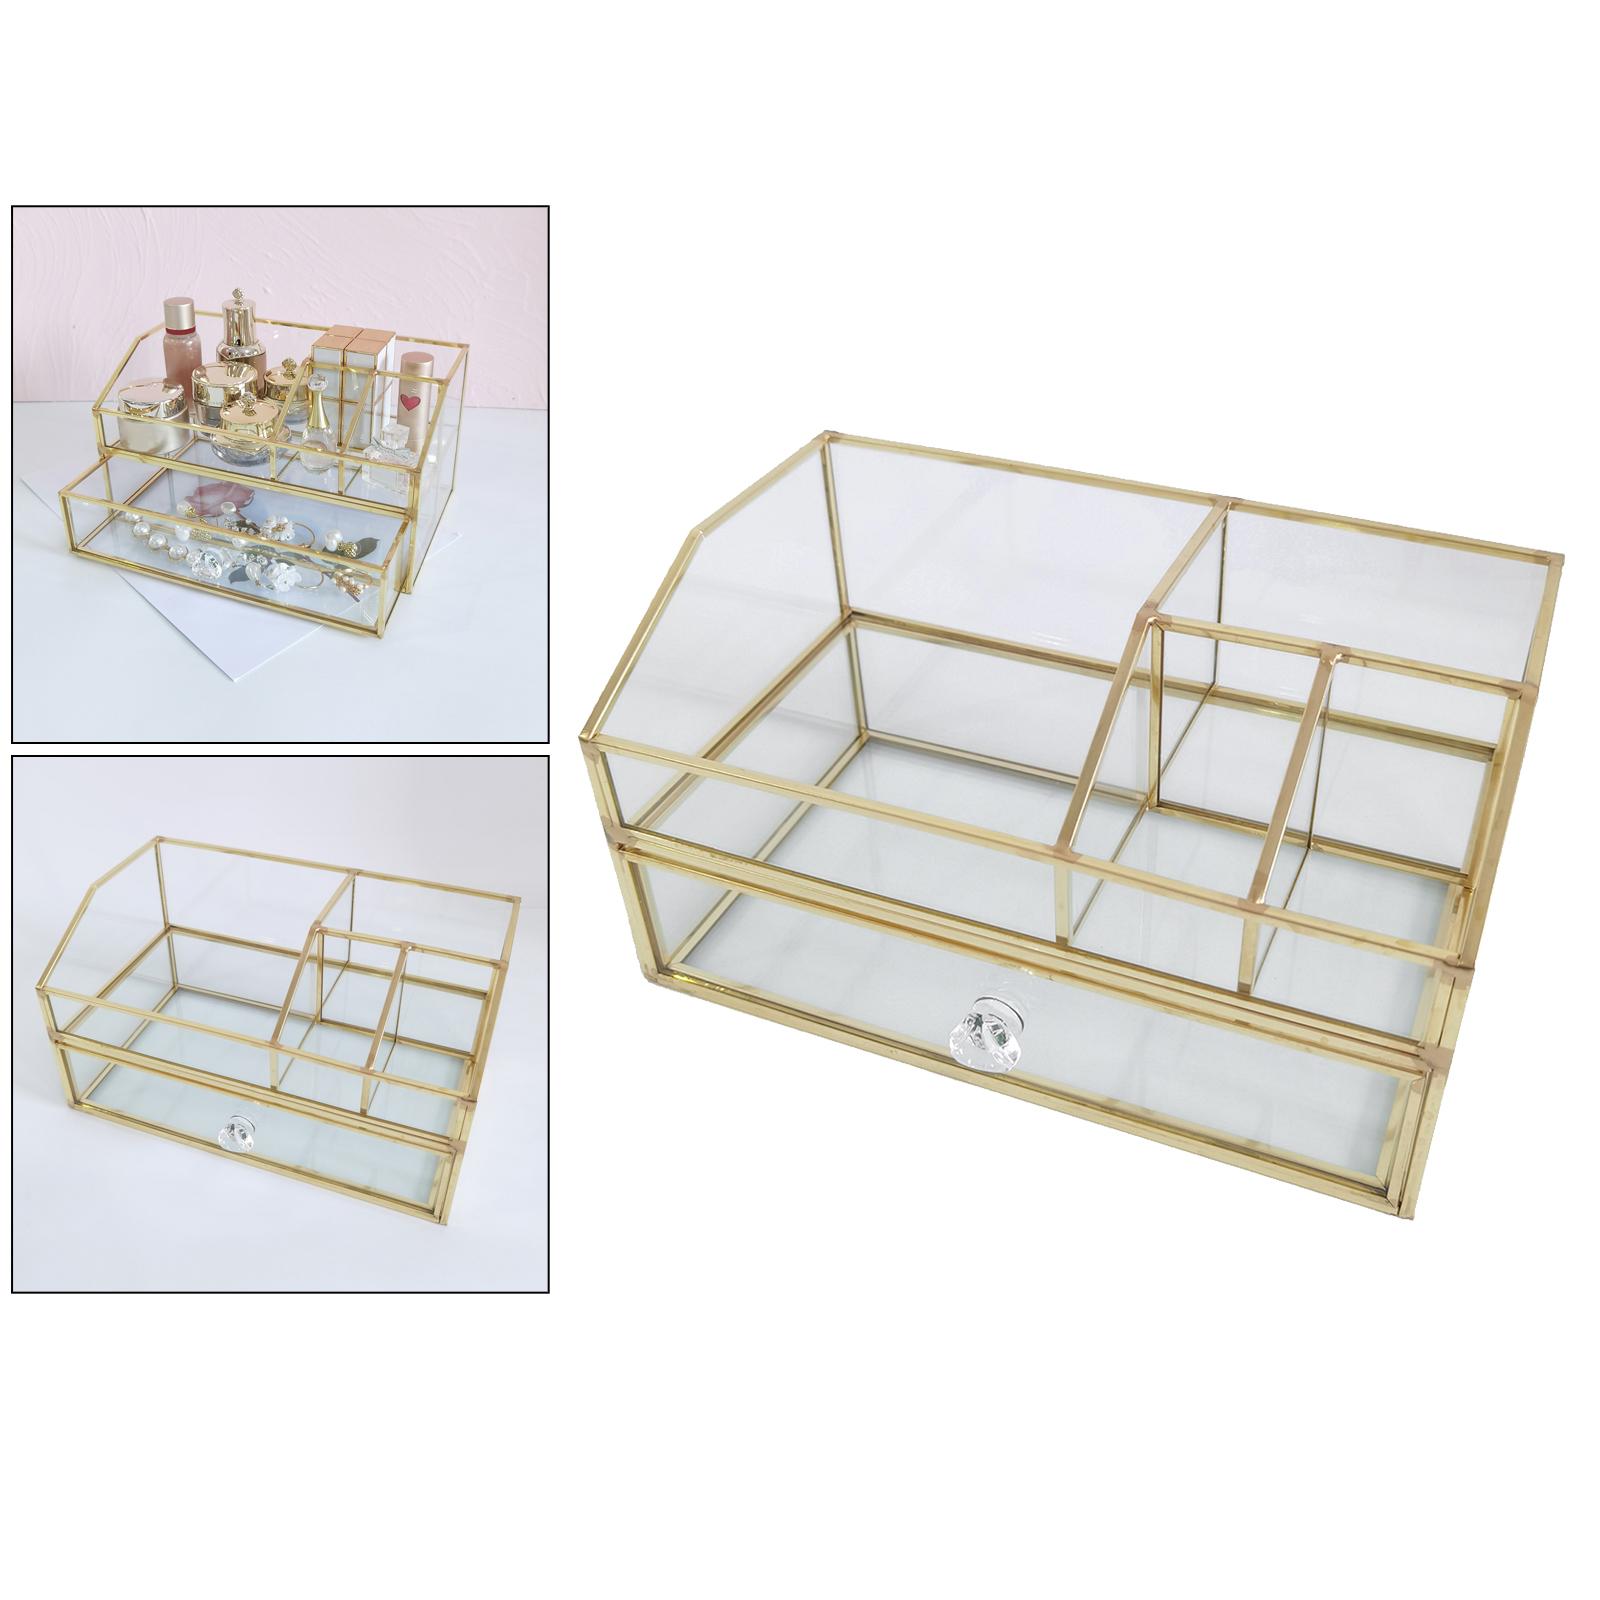 Clear Glass Jewelry Organizer Box - Golden Metal Keepsake Box Jewelry Organizer Holder, Wedding Birthday Gift, Vanity Decorative Case for Dresser